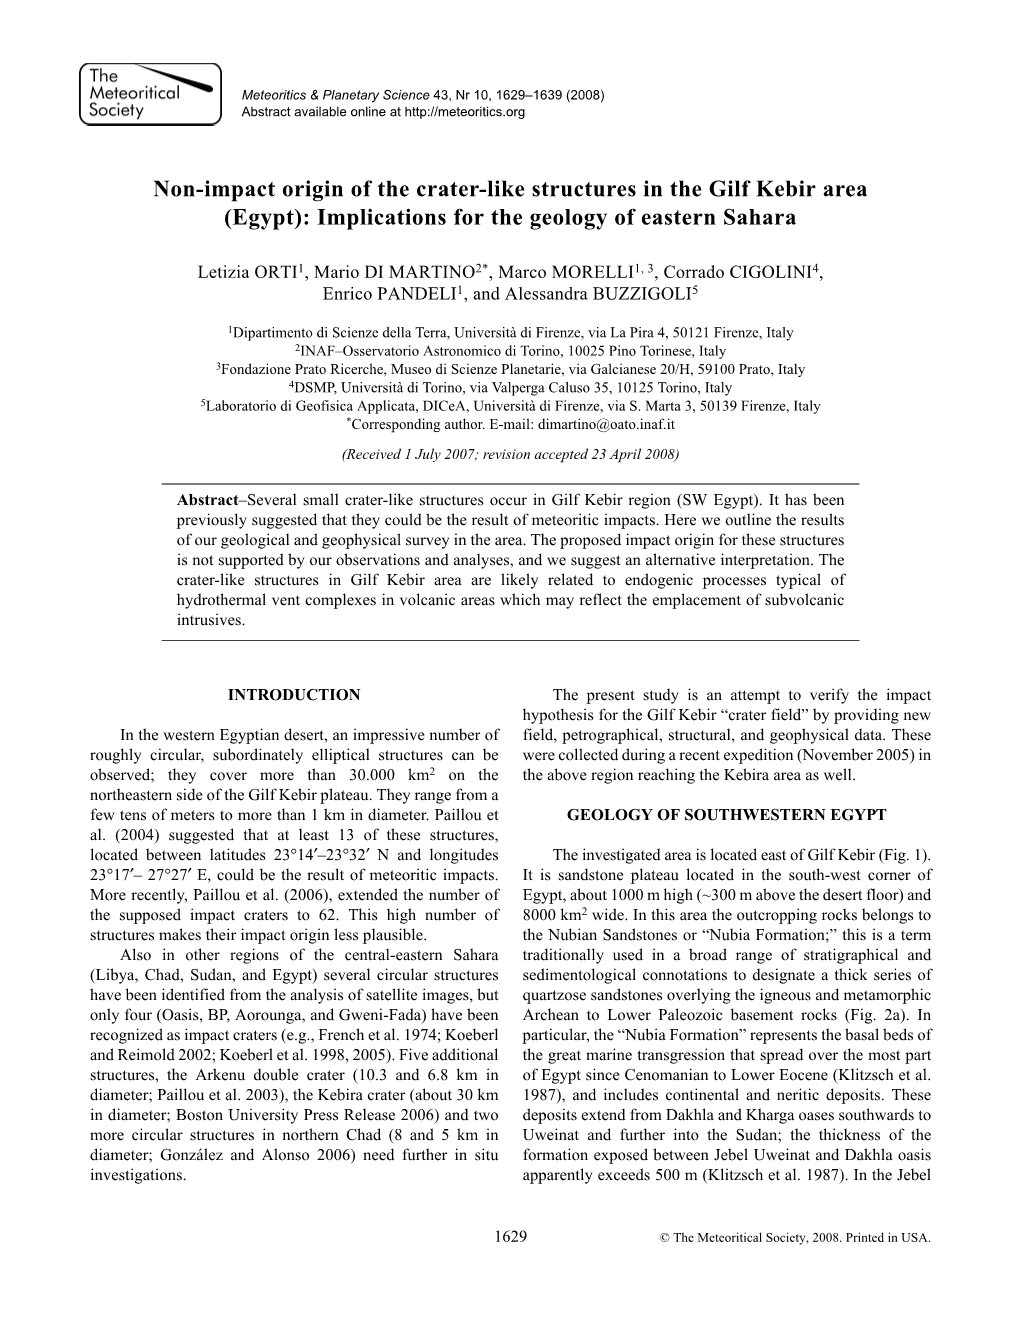 Non-Impact Origin of the Crater-Like Structures in the Gilf Kebir Area (Egypt): Implications for the Geology of Eastern Sahara